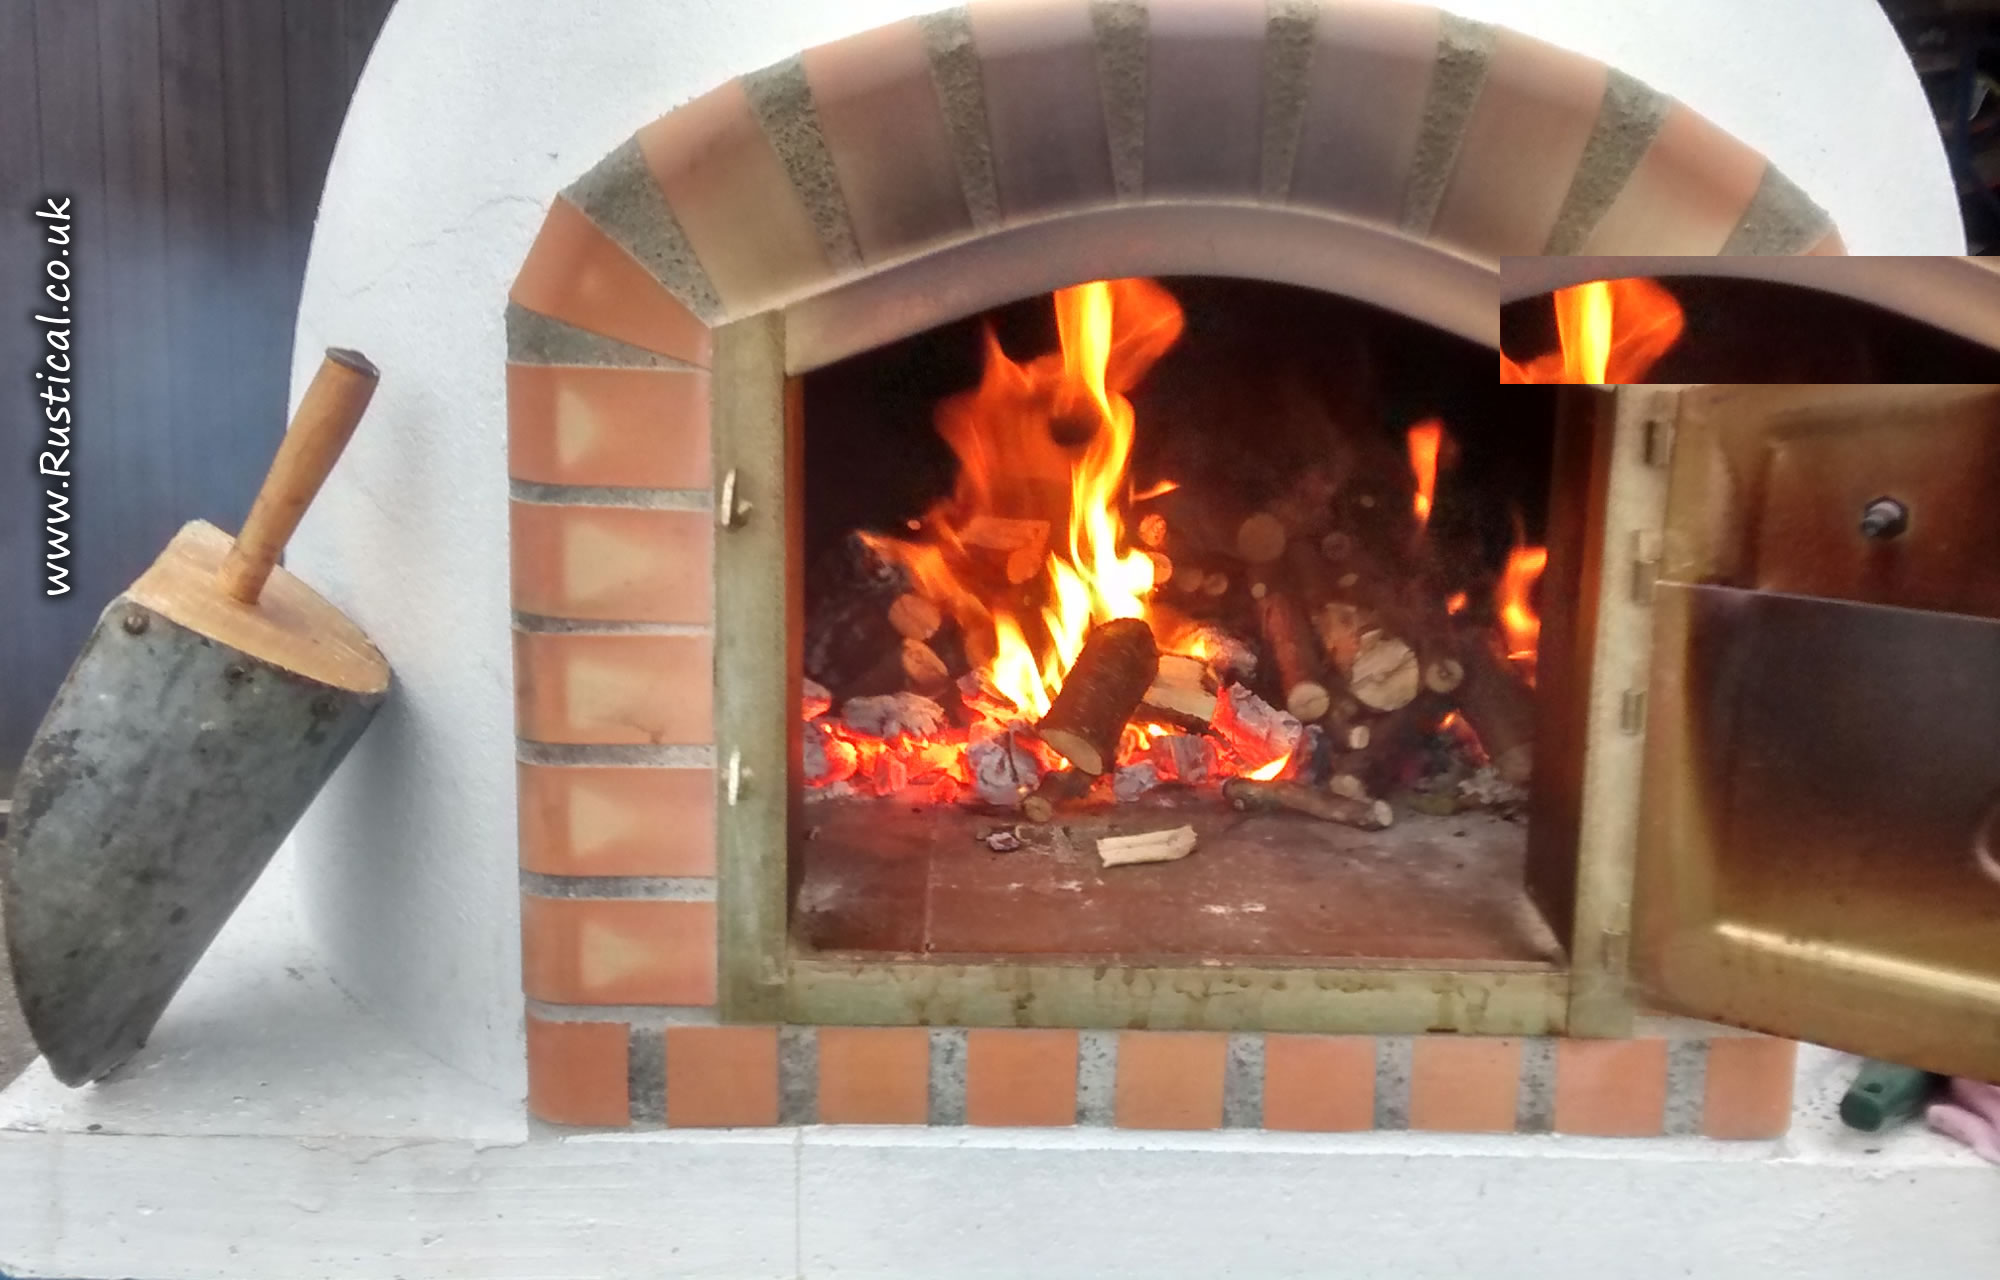 Our pizza oven loaded with wood chunks